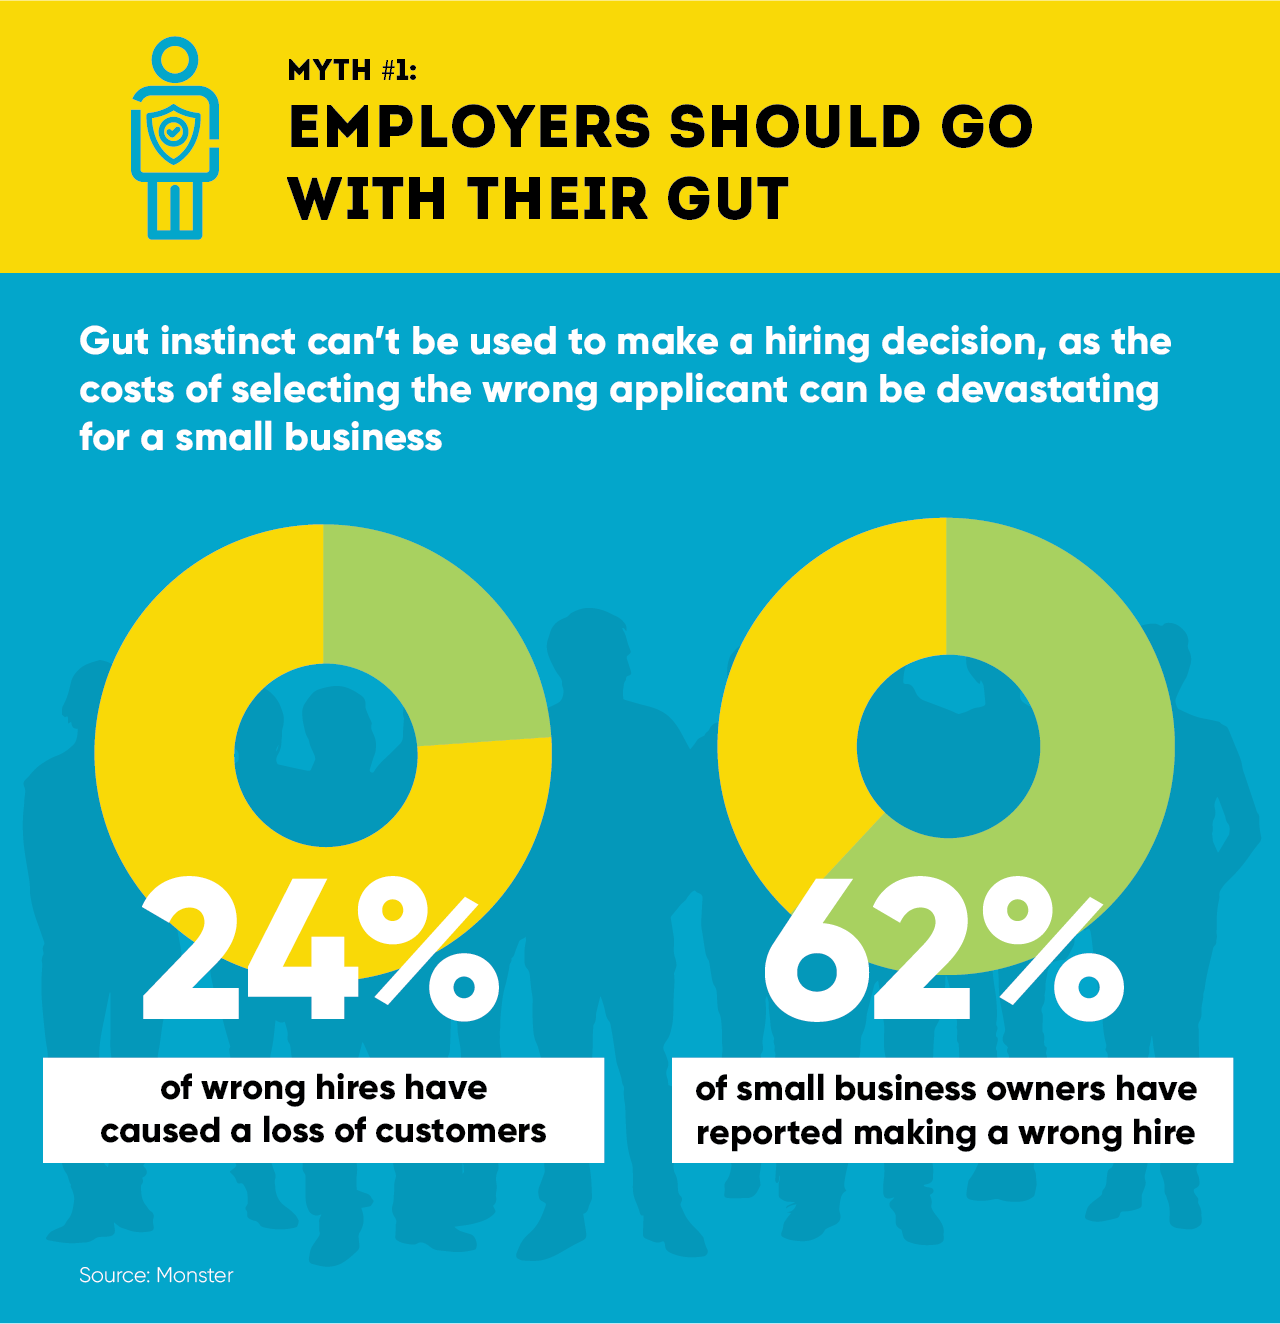 Employers should go with their gut